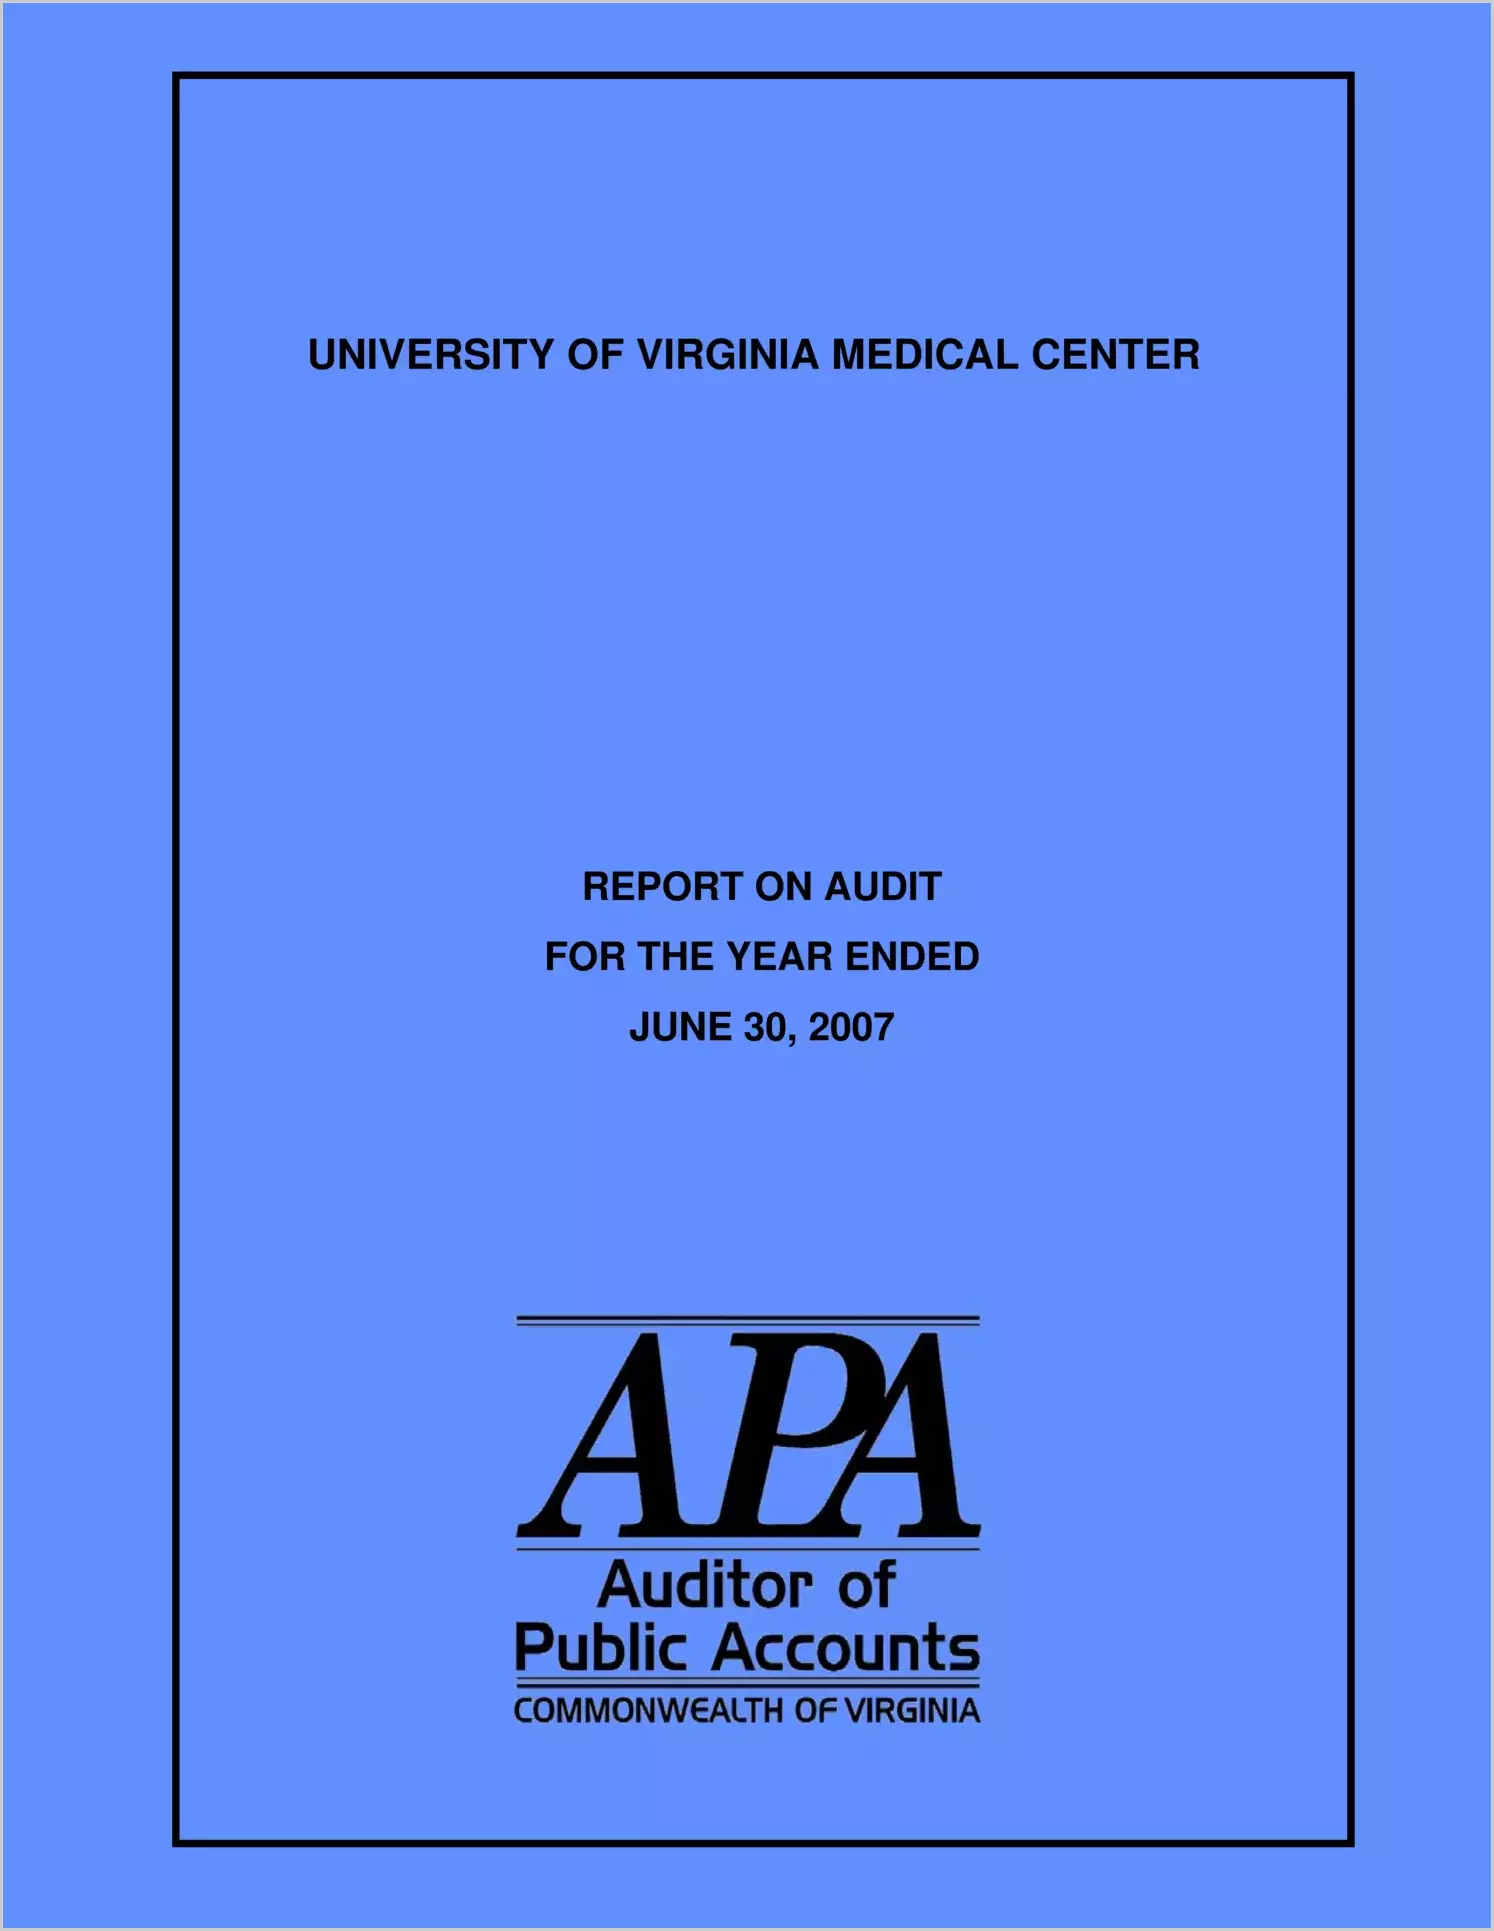 University of Virginia Medical Center for the year ended June 30, 2007